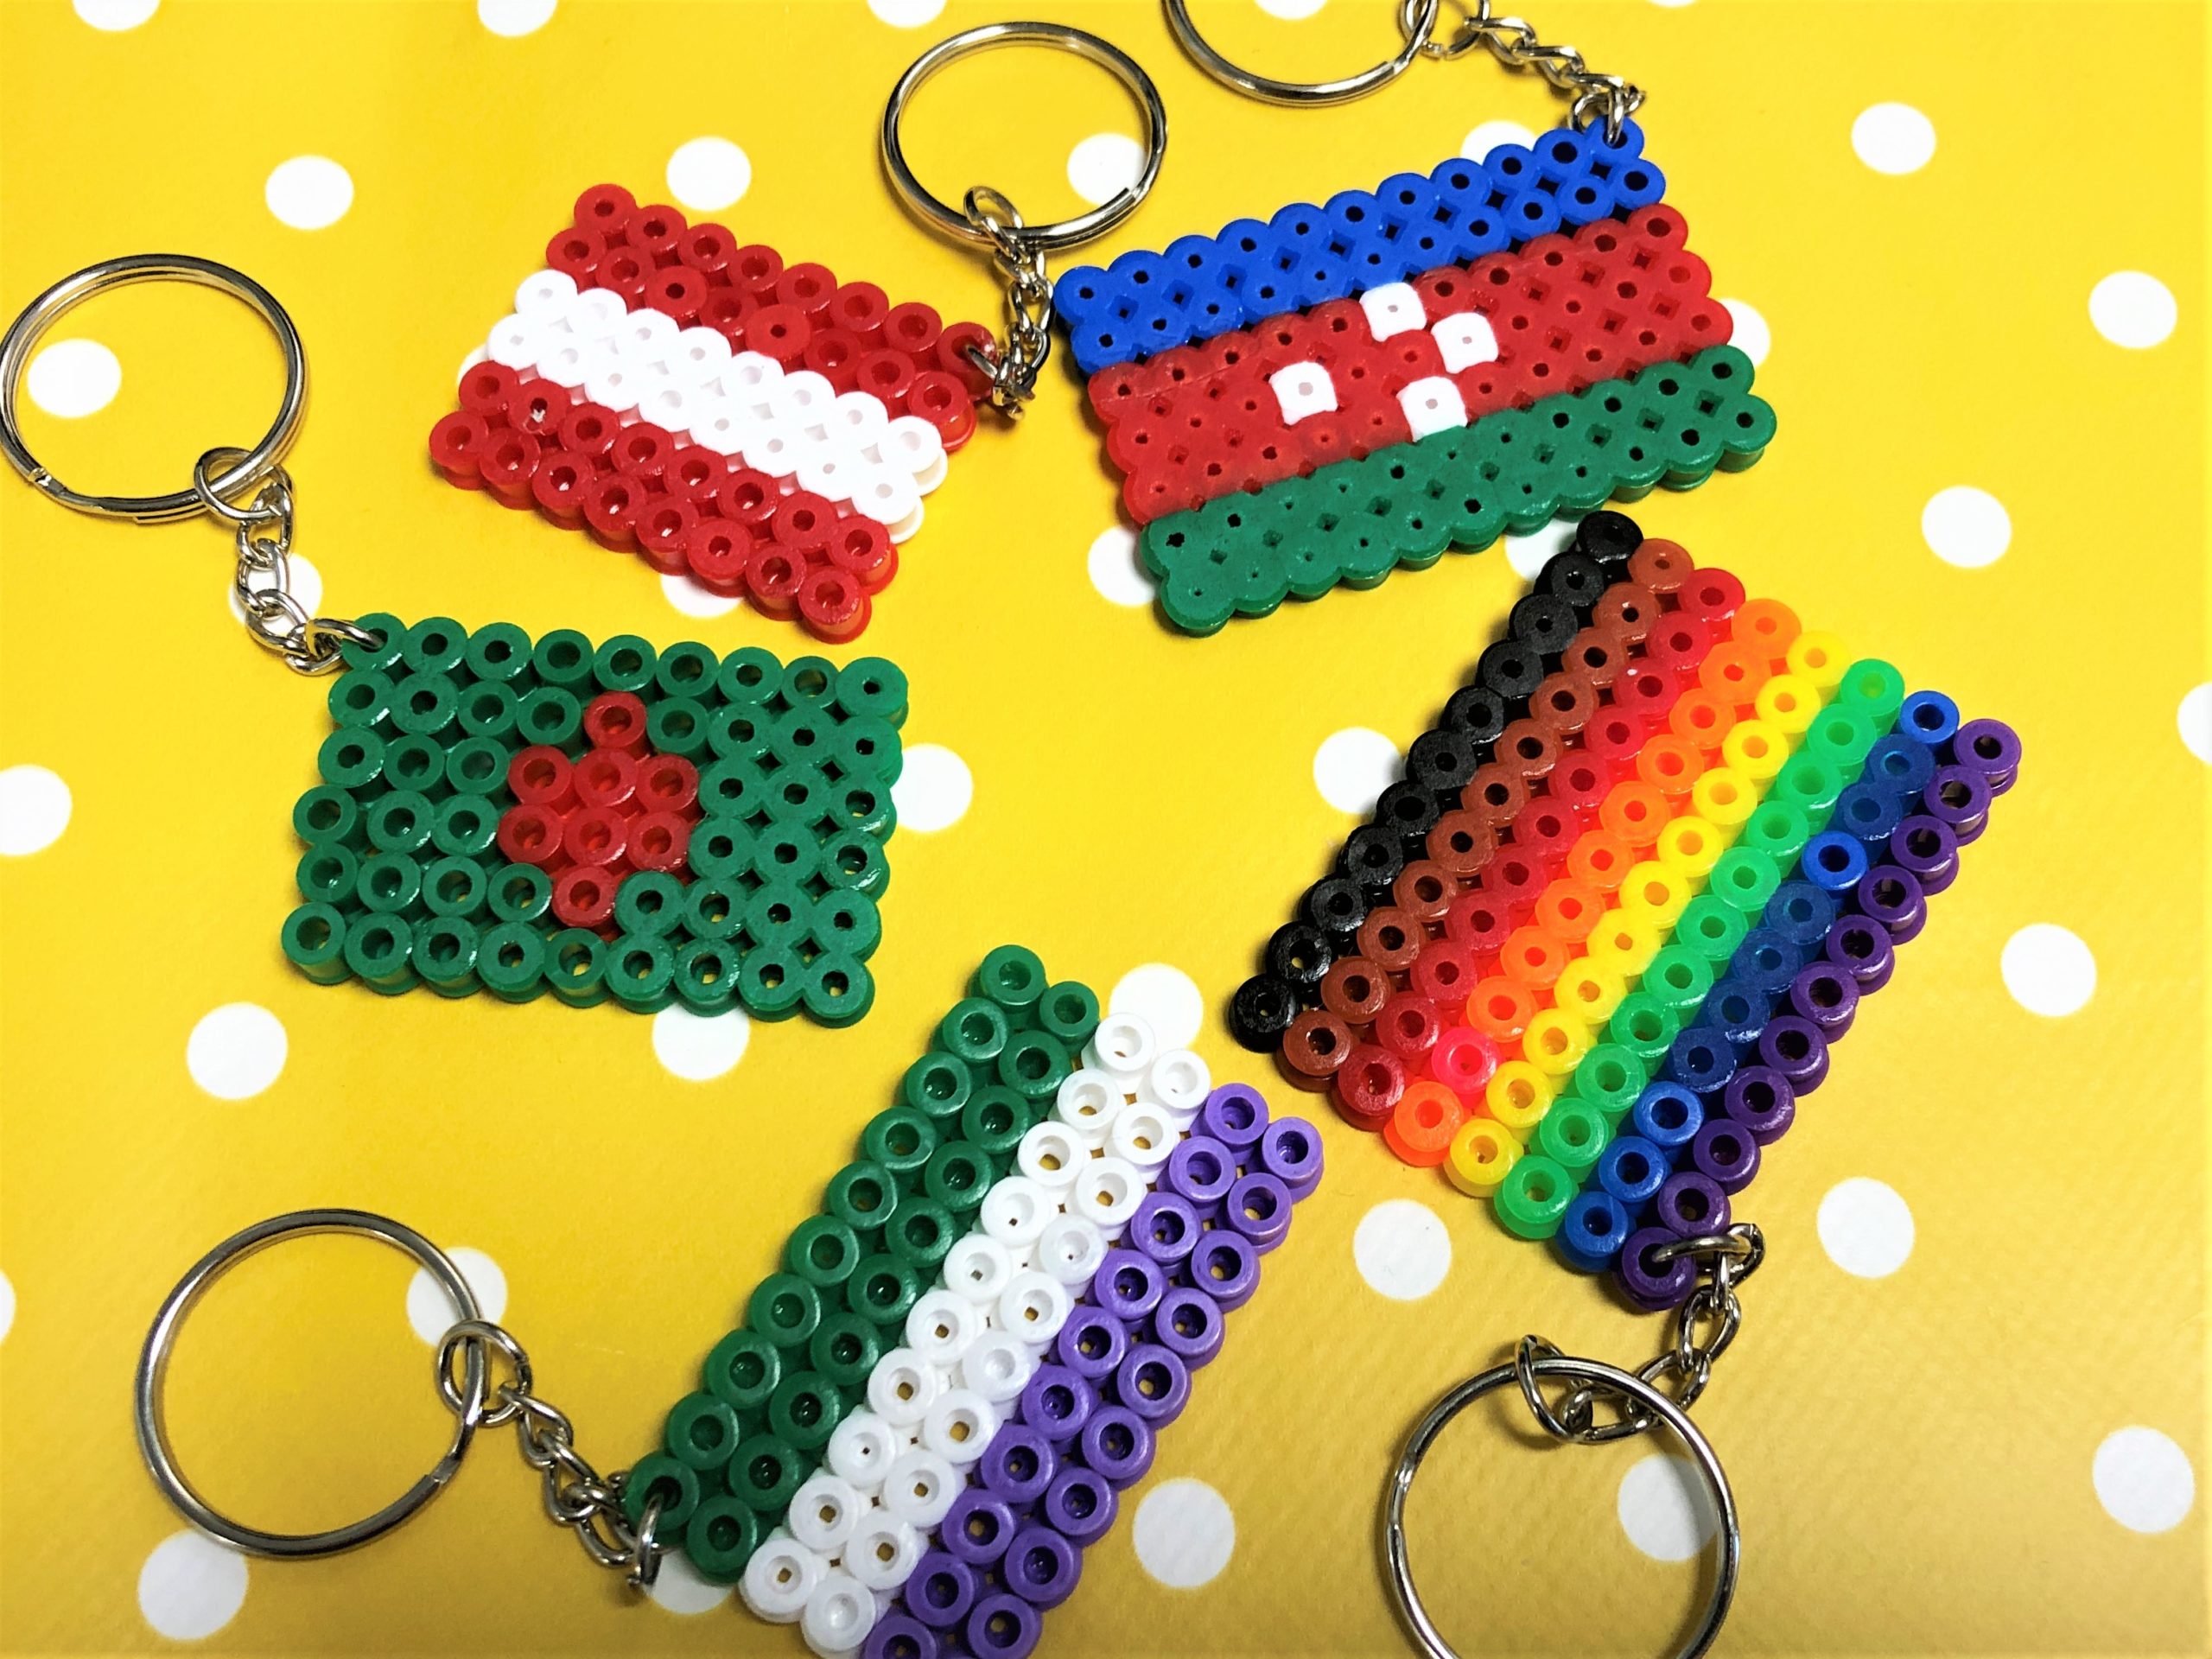 Five brightly coloured hama bead keyrings: Hama bead flag keyrings arranged in a group on a yellow and white spotty background. The flags from left to right are (1).purple, white and green horizontal stripe, (2). green with a red cross in the centre, (3).two red stripes separated by a white stripe, (4). blue, red and green stripes with four white dots in the centre of the red stripe (5). black, brown, red, orange, yellow, green, blue and purple stripe